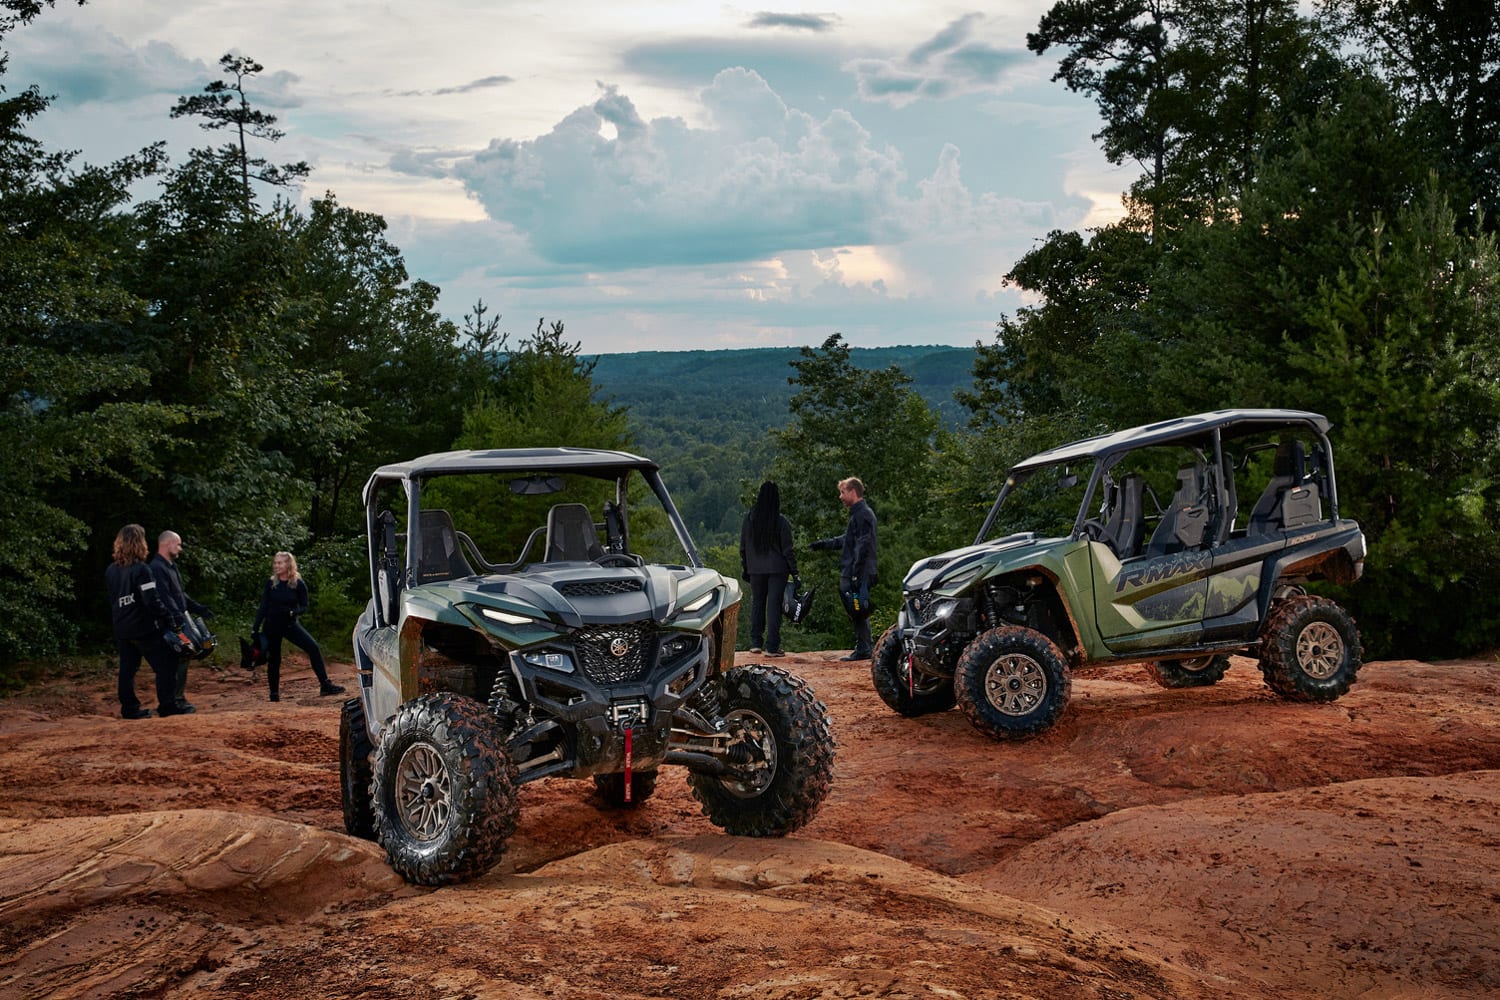 Yamaha Motor introduces the 2021 Side-by-Side (SxS) and ATV lineup of Proven Off-Road vehicles.